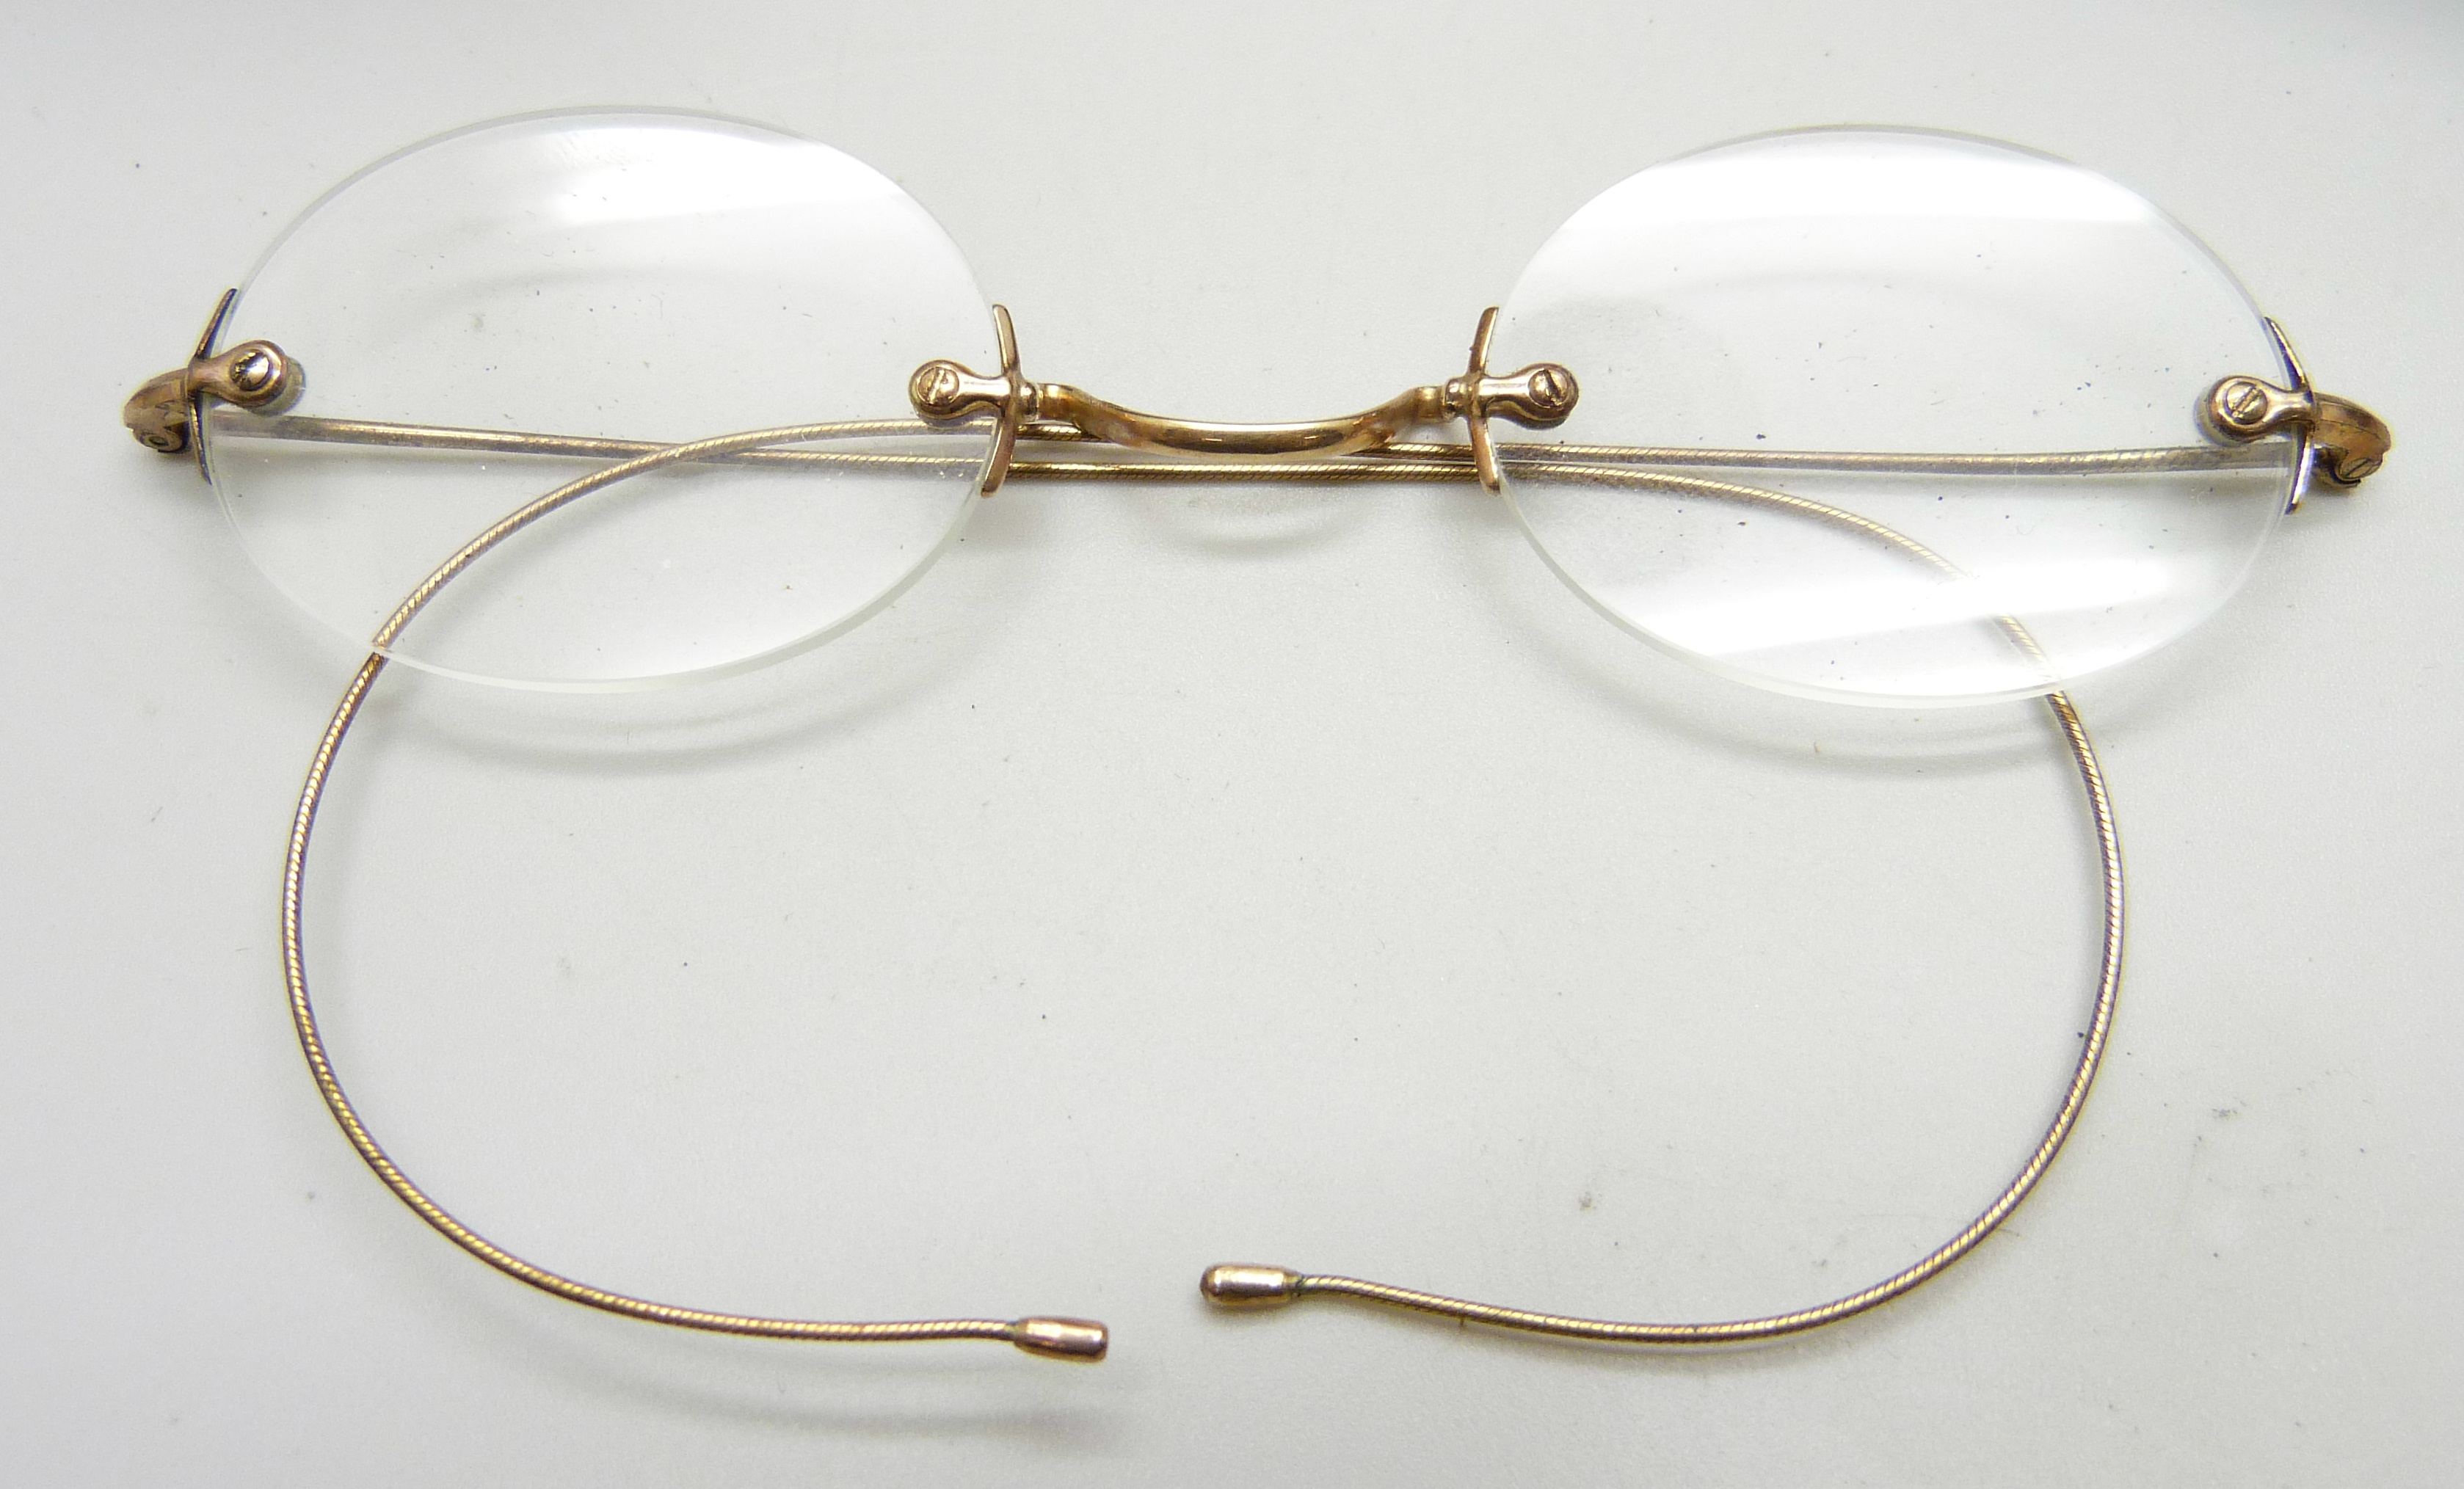 A pair of vintage spectacles, with case and box, marked Henry Laurance, 44 Hatton Garden - Image 2 of 3